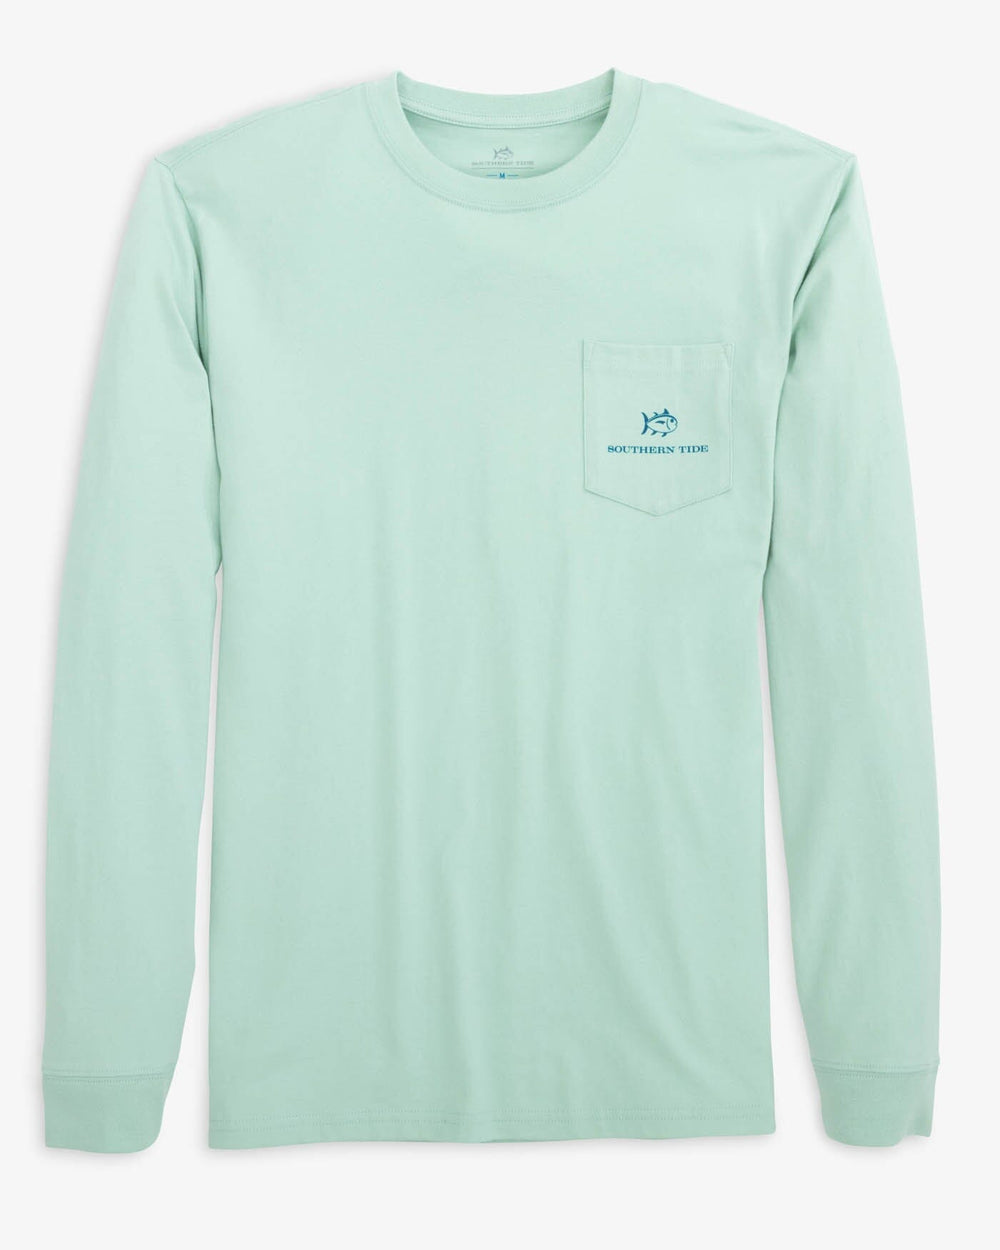 The front view of the Southern Tide Framed Fish Friends Long Sleeve T-Shirt by Southern Tide - Summer Aqua